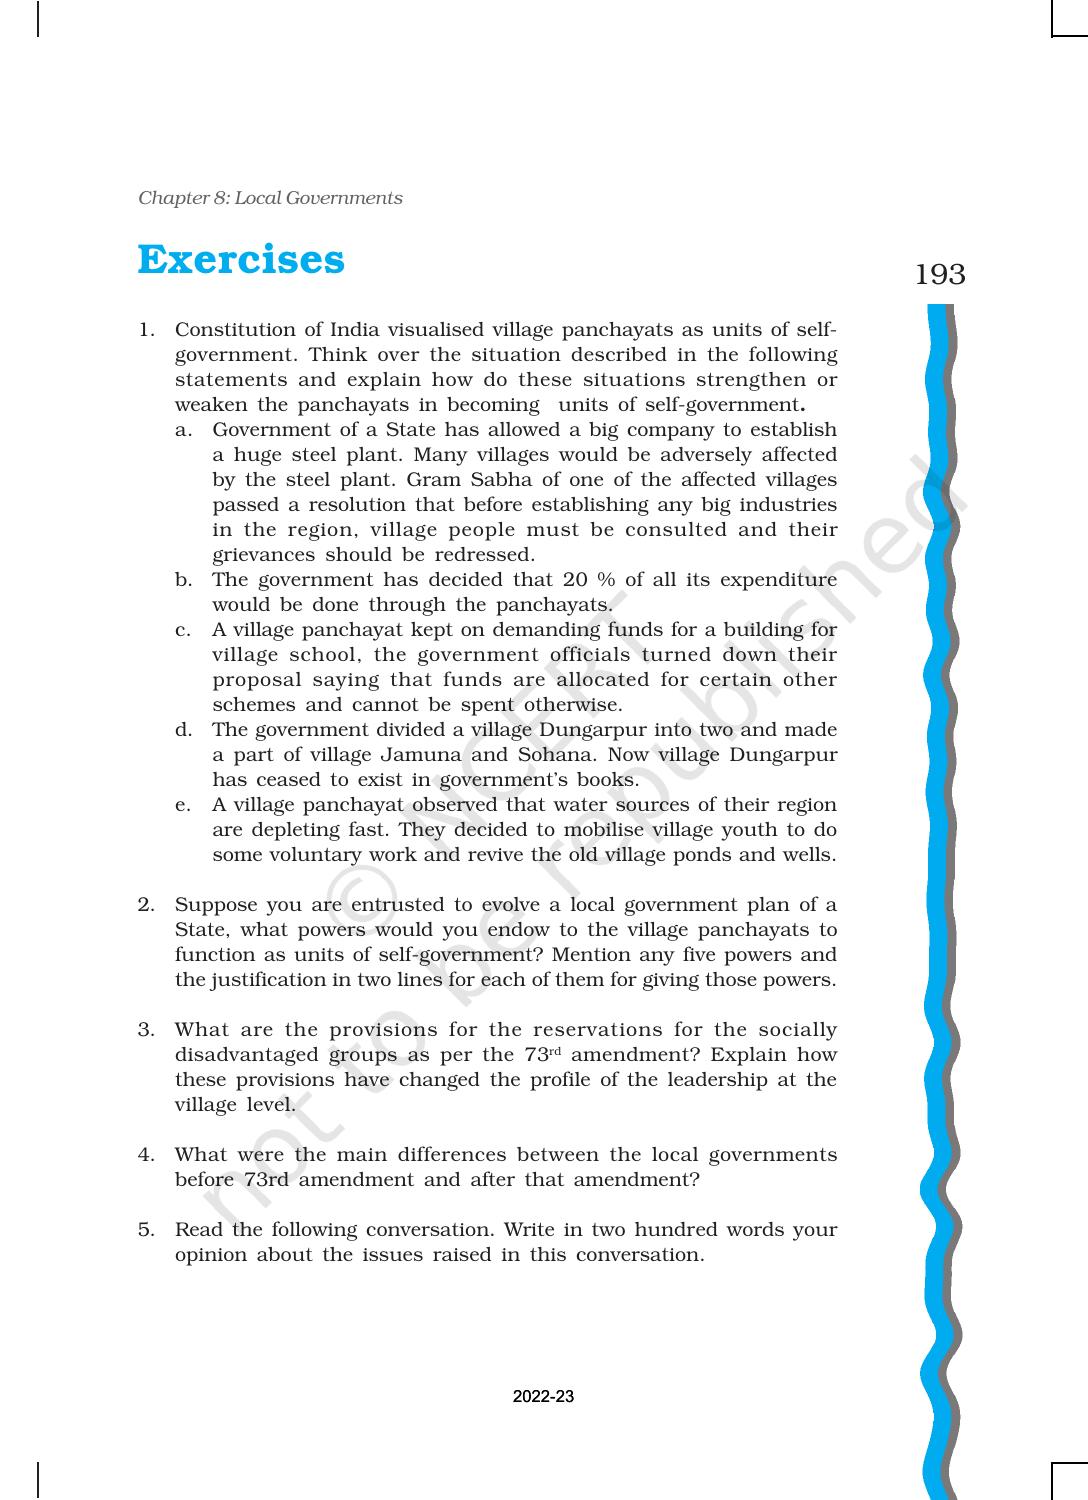 NCERT Book for Class 11 Political Science (Indian Constitution at Work) Chapter 8 Local Governments - Page 18